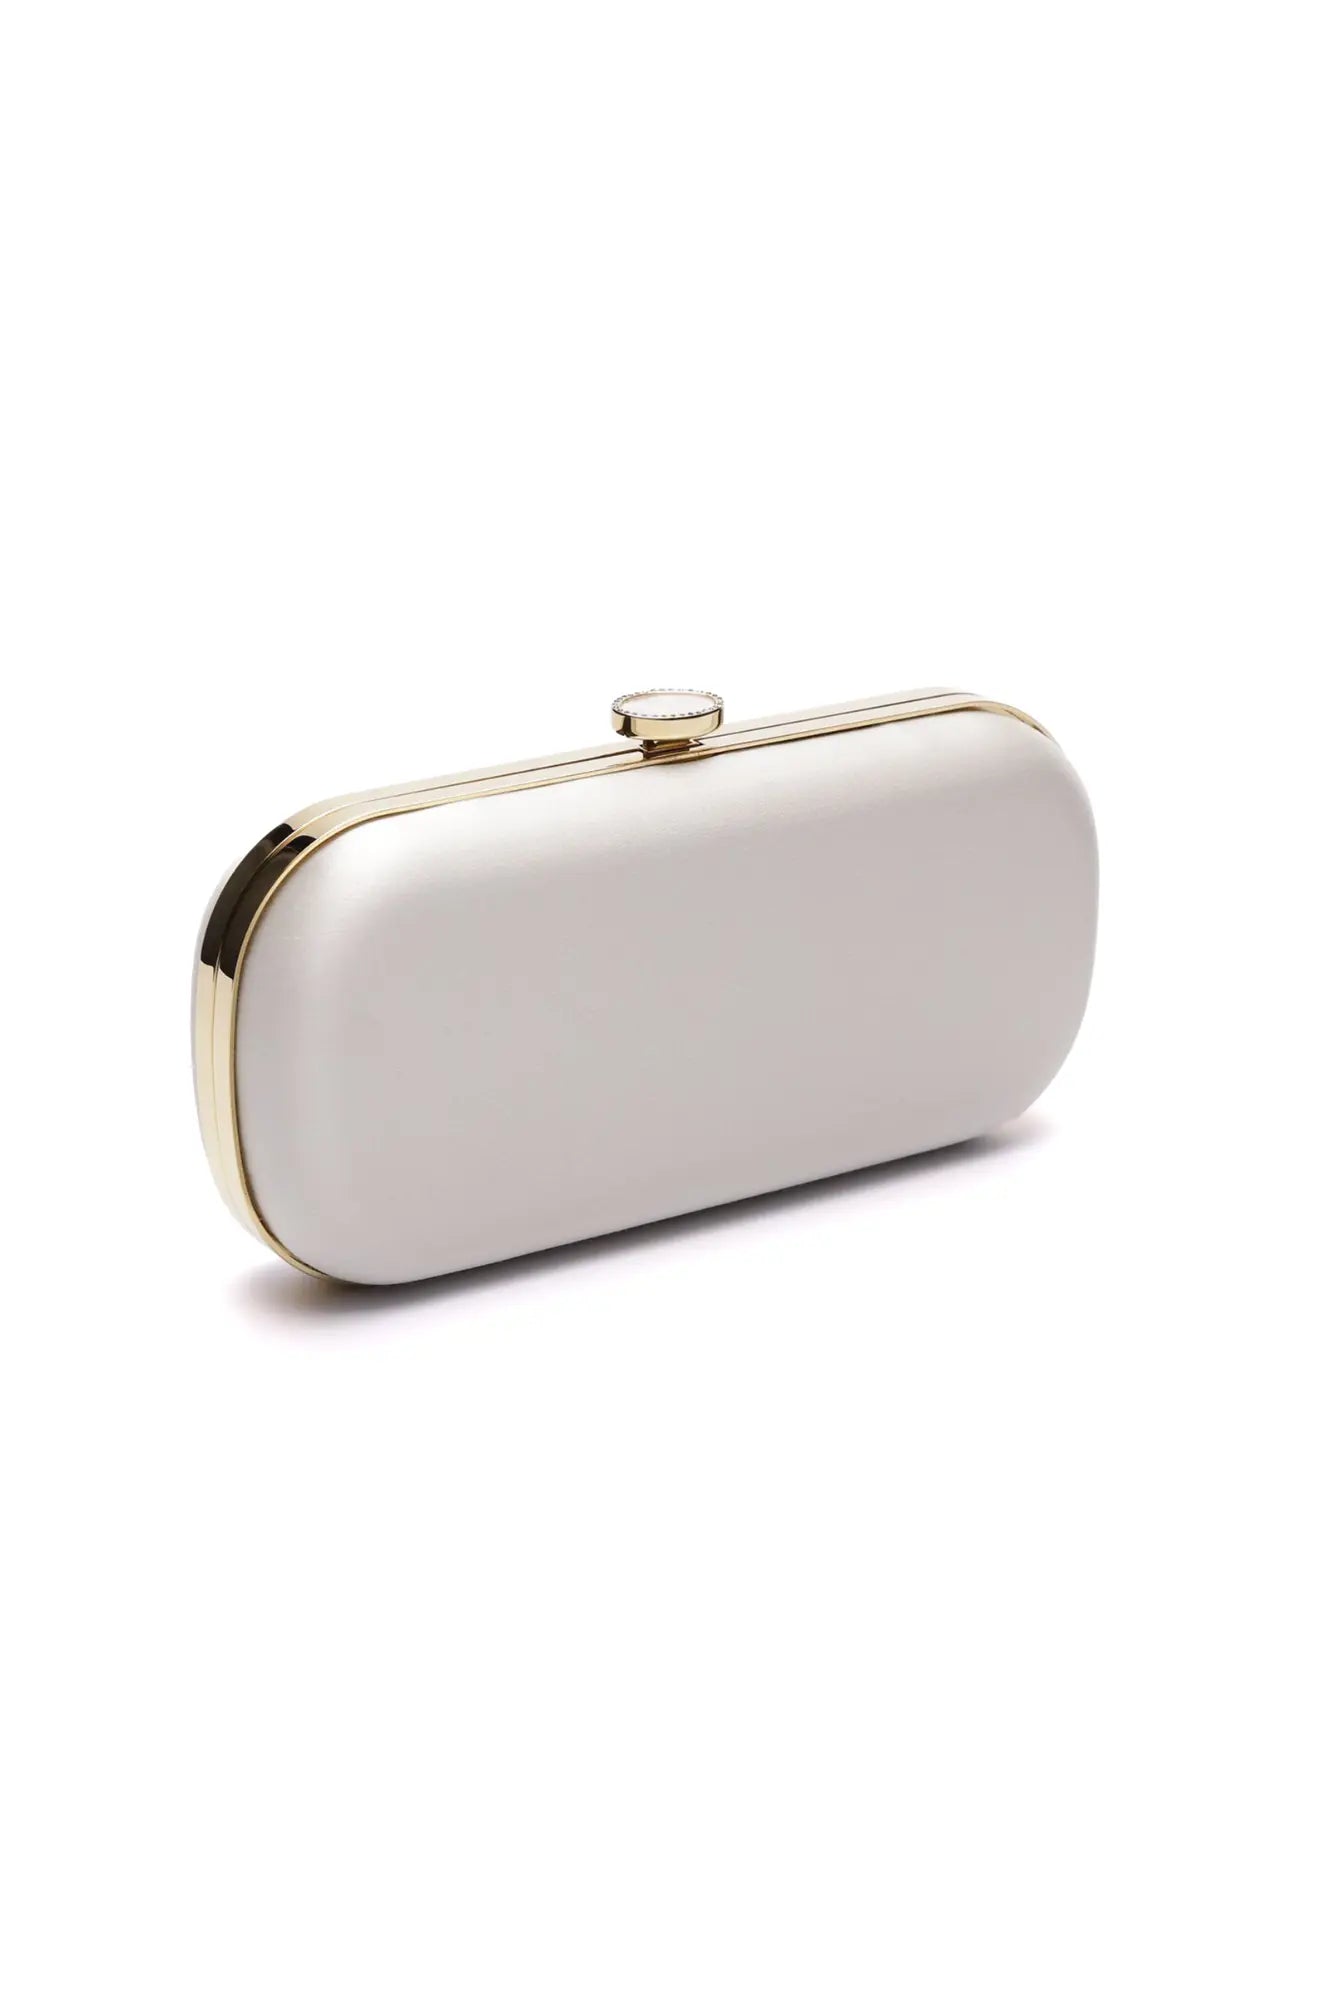 Bella Clutch Ivory Grande, a petite bespoke bridal accessory with gold trim against a white background from The Bella Rosa Collection.